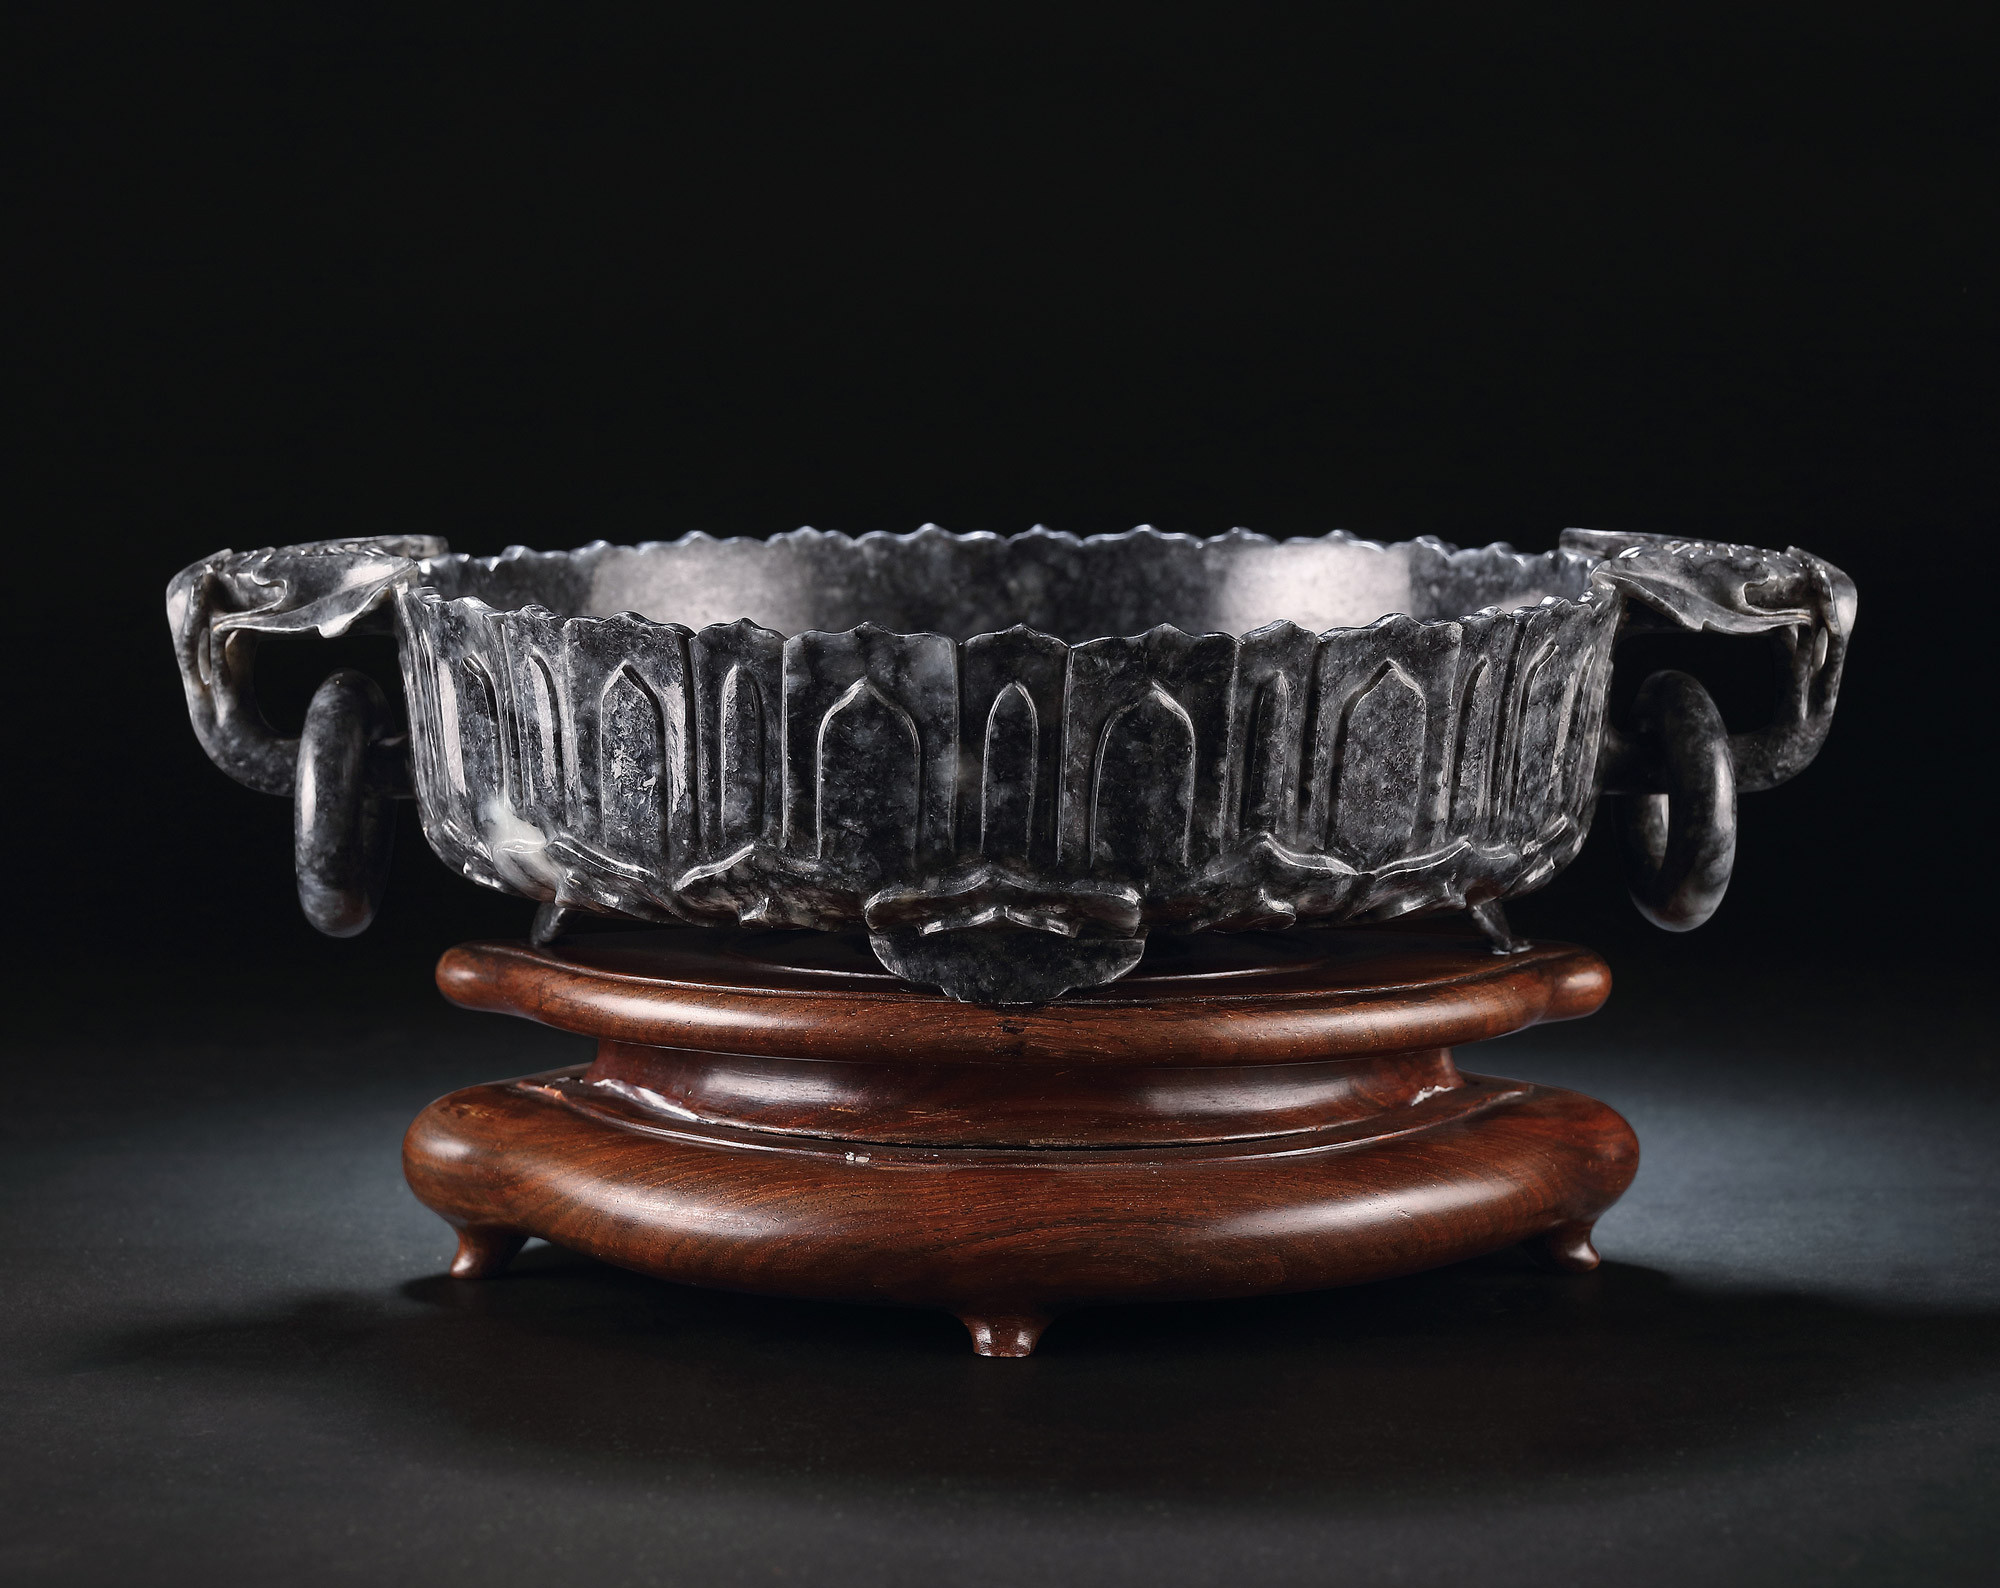 A HINDUSTAN-TYPE LOTUS-SHAPED BRUSH WASHER MADE OF BLACK-AND-WHITE JADE